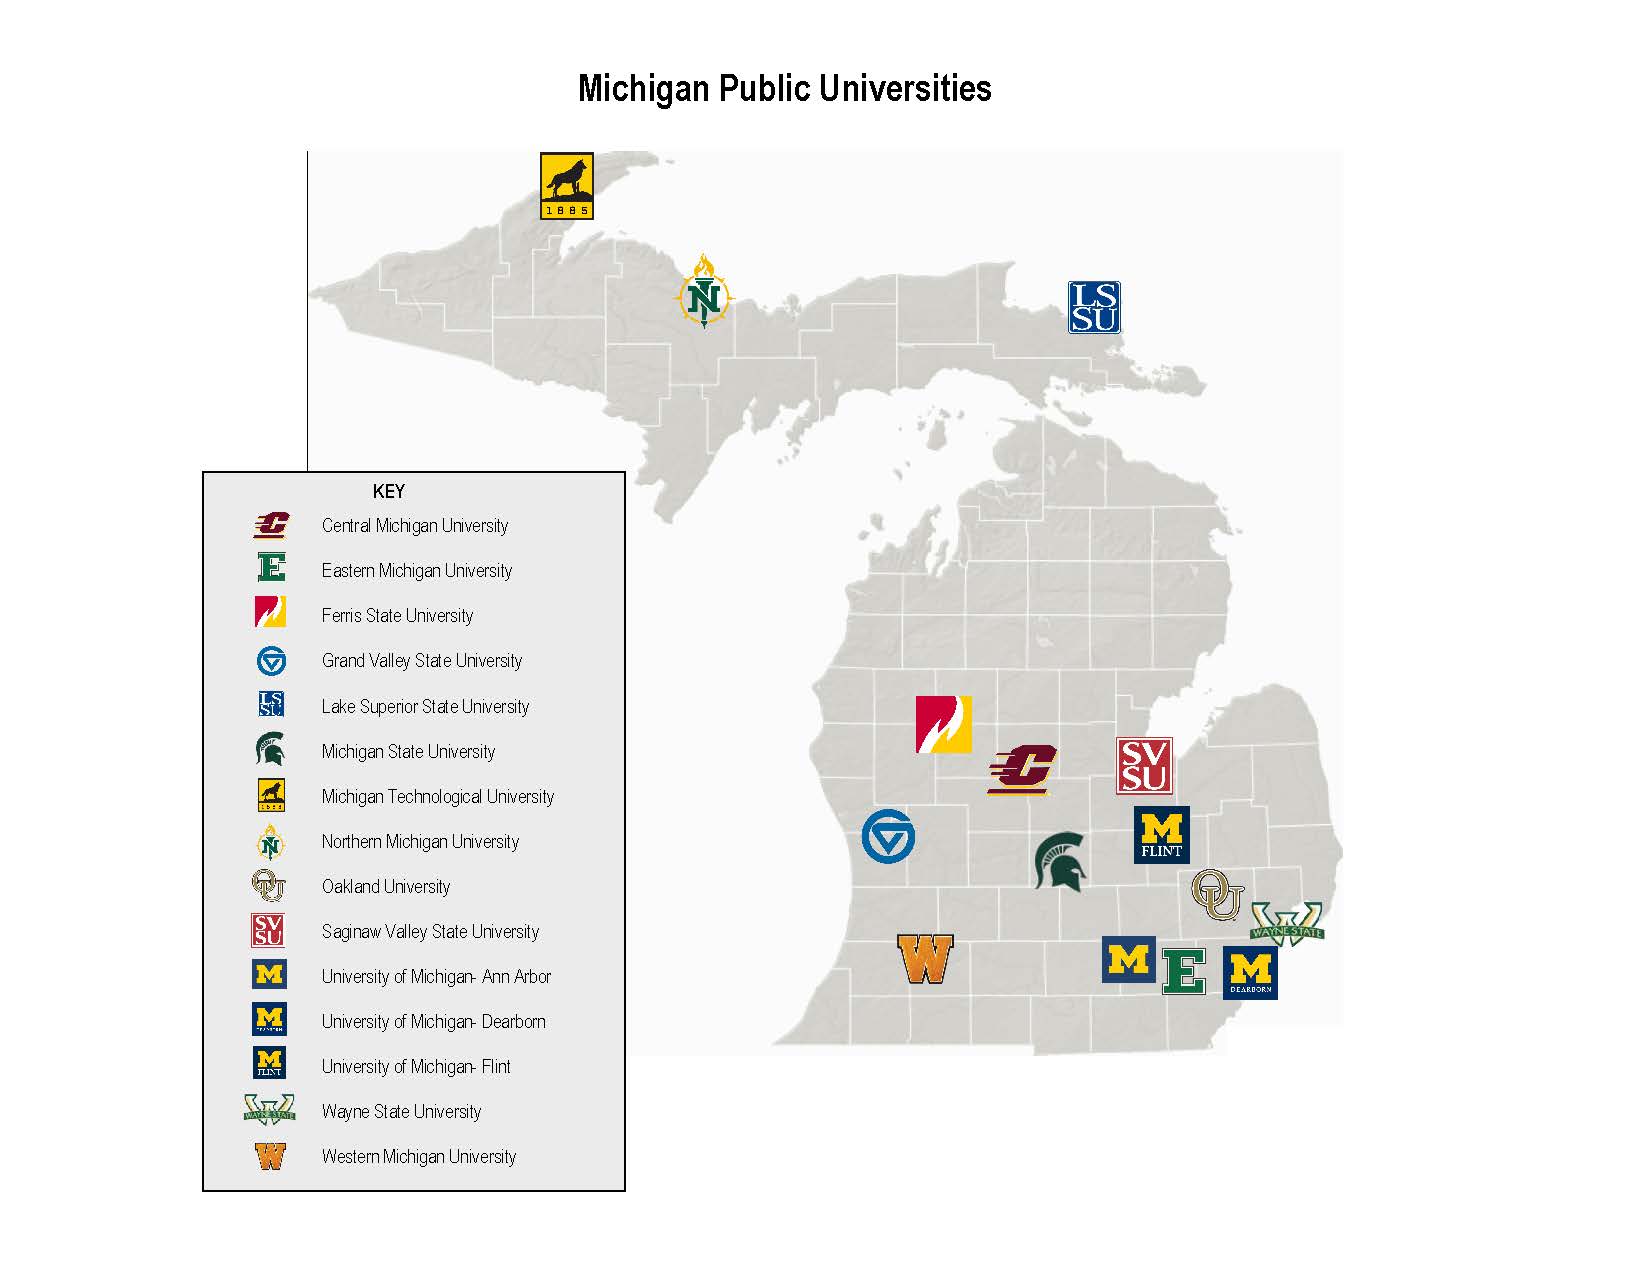 Map of the state of Michigan showing the main campus locations of Michigan's public universities